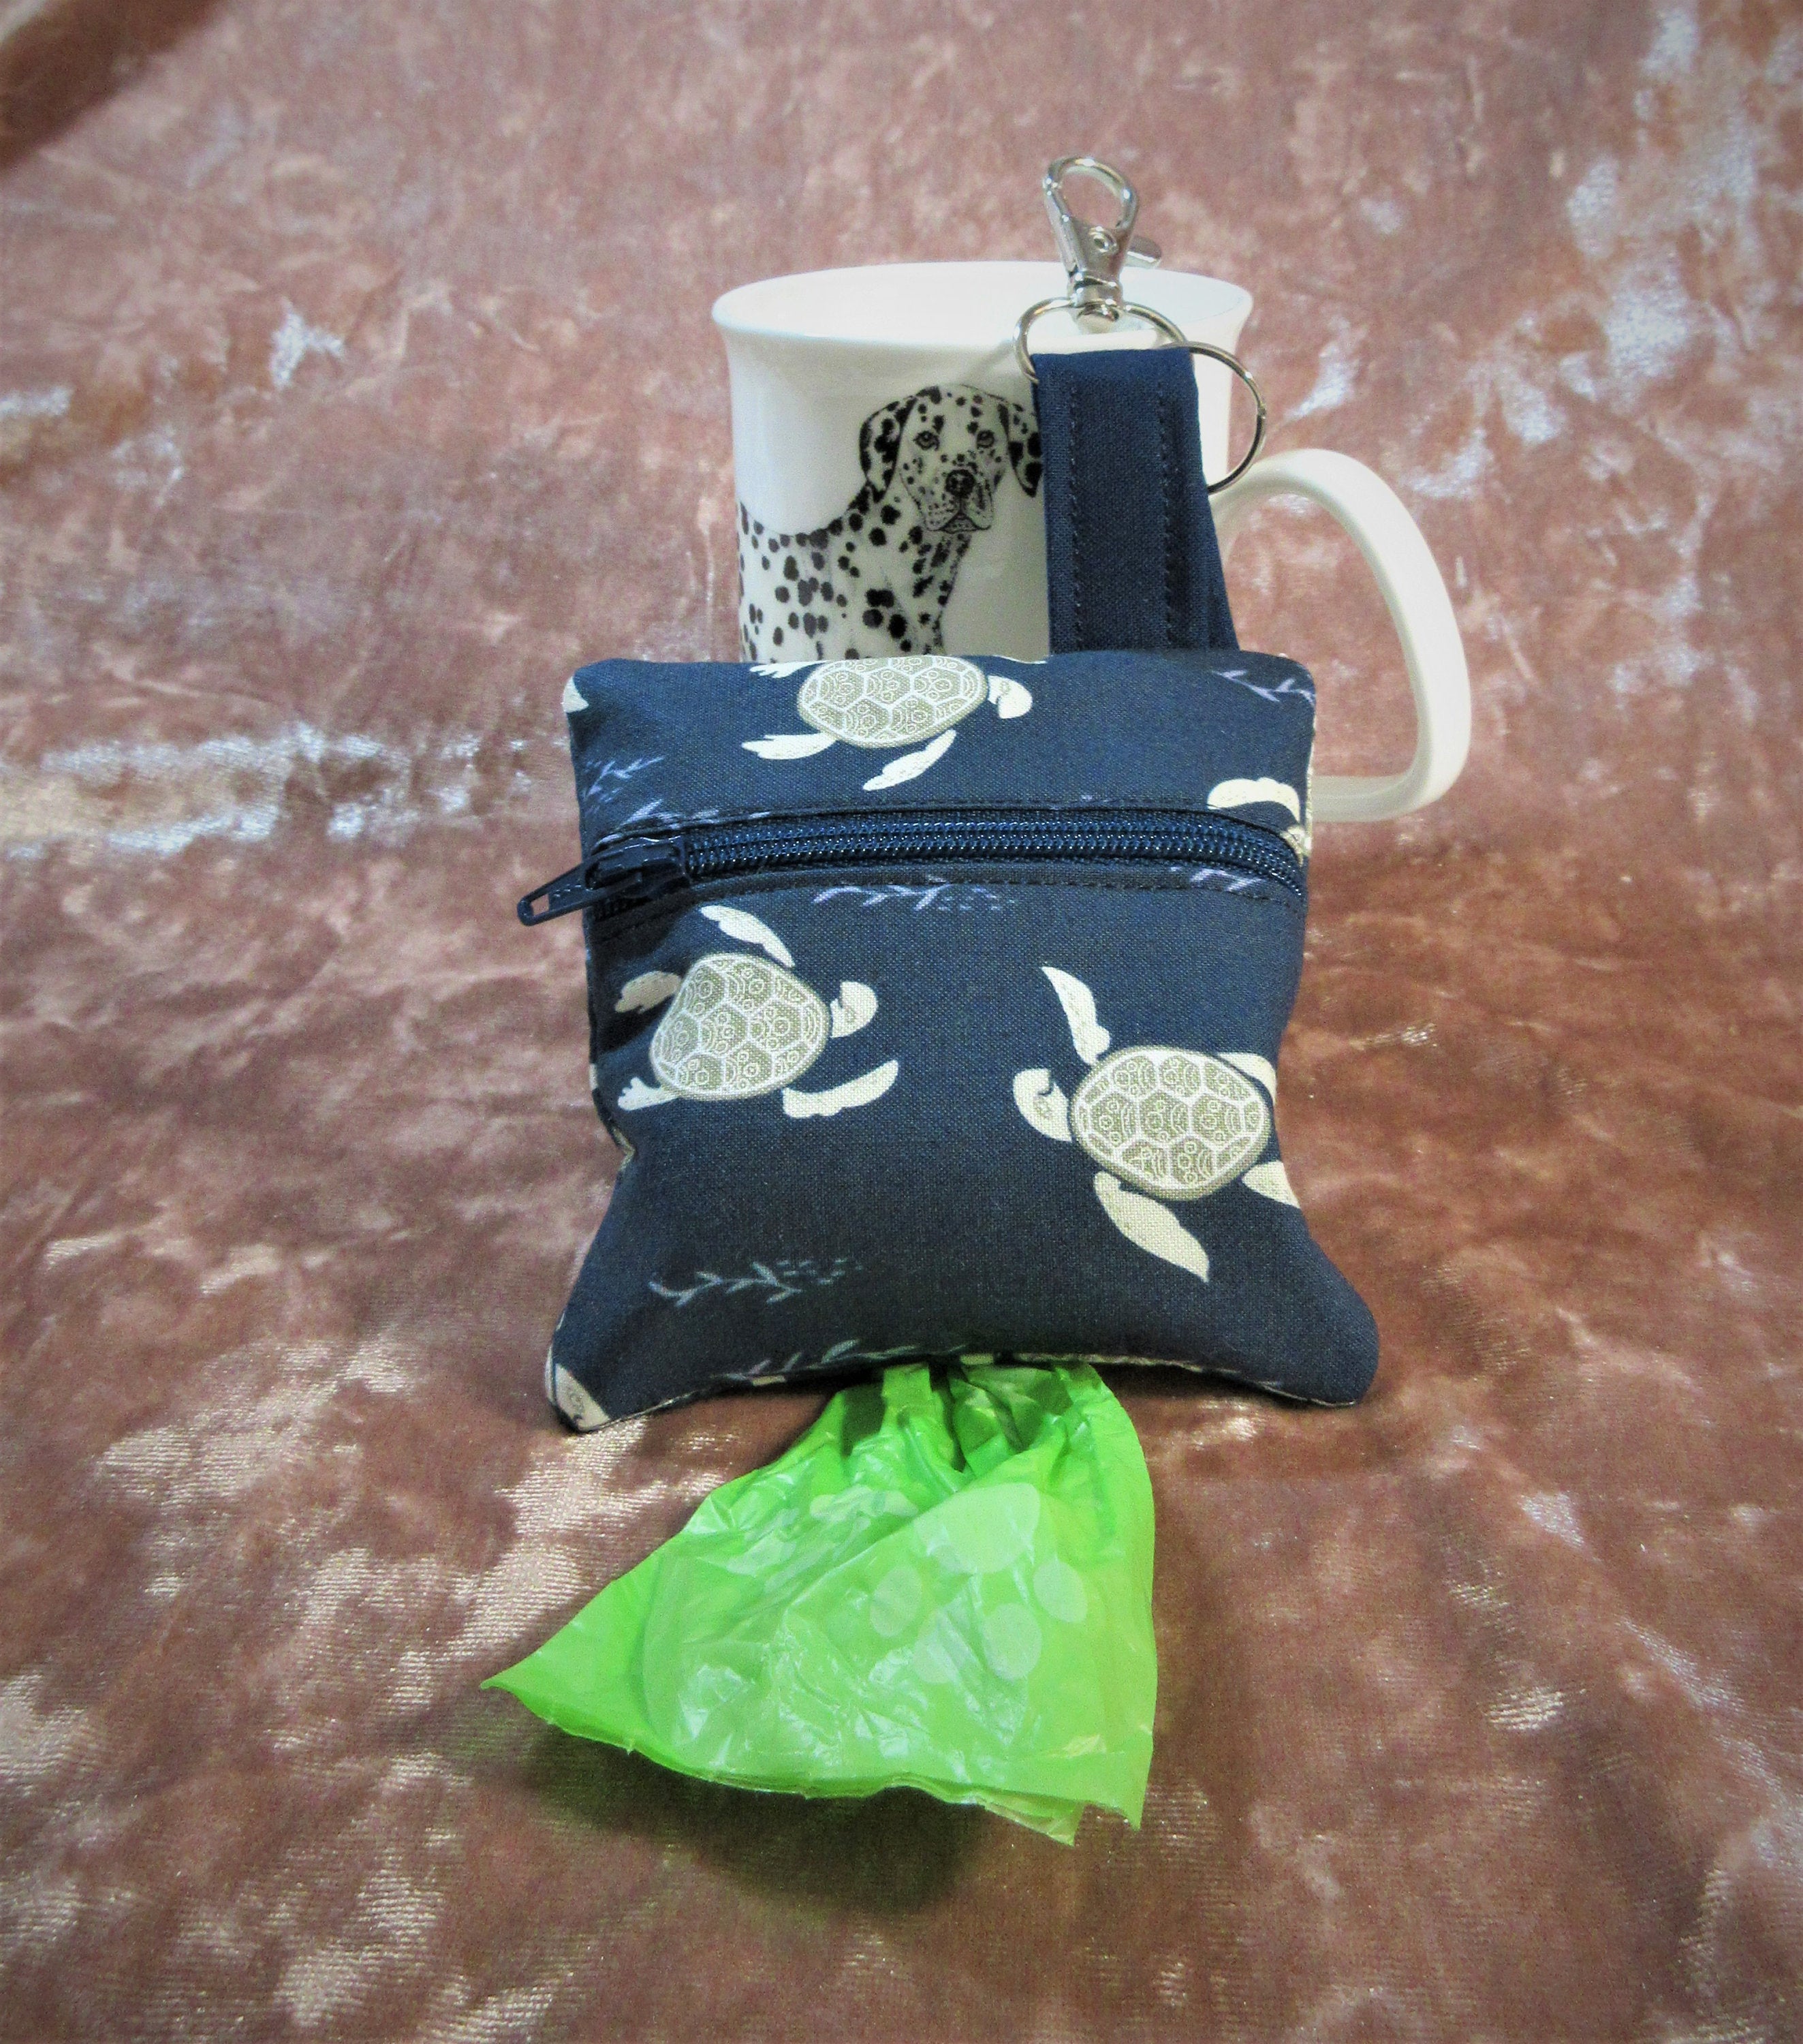 Gift set grey turtles on navy bluee with sea grass zipper bag and drink sleeve hand made in the USA by A Fur Baby Favorite